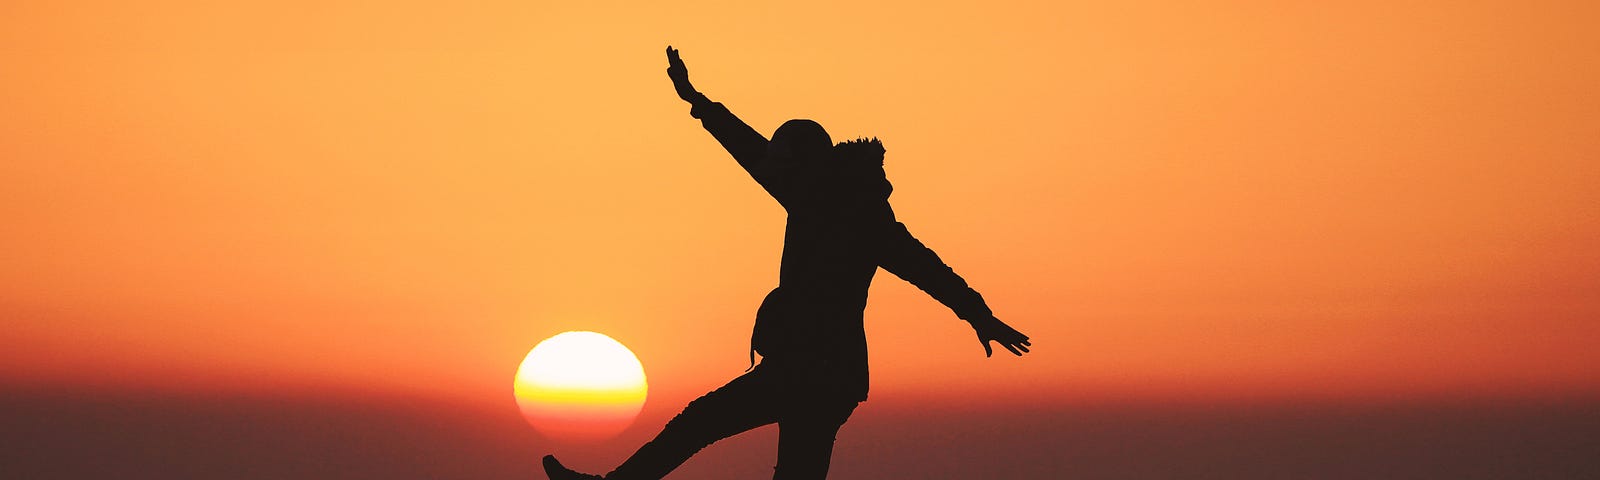 A person playfully posing on top of a rock with a sunset in the background.